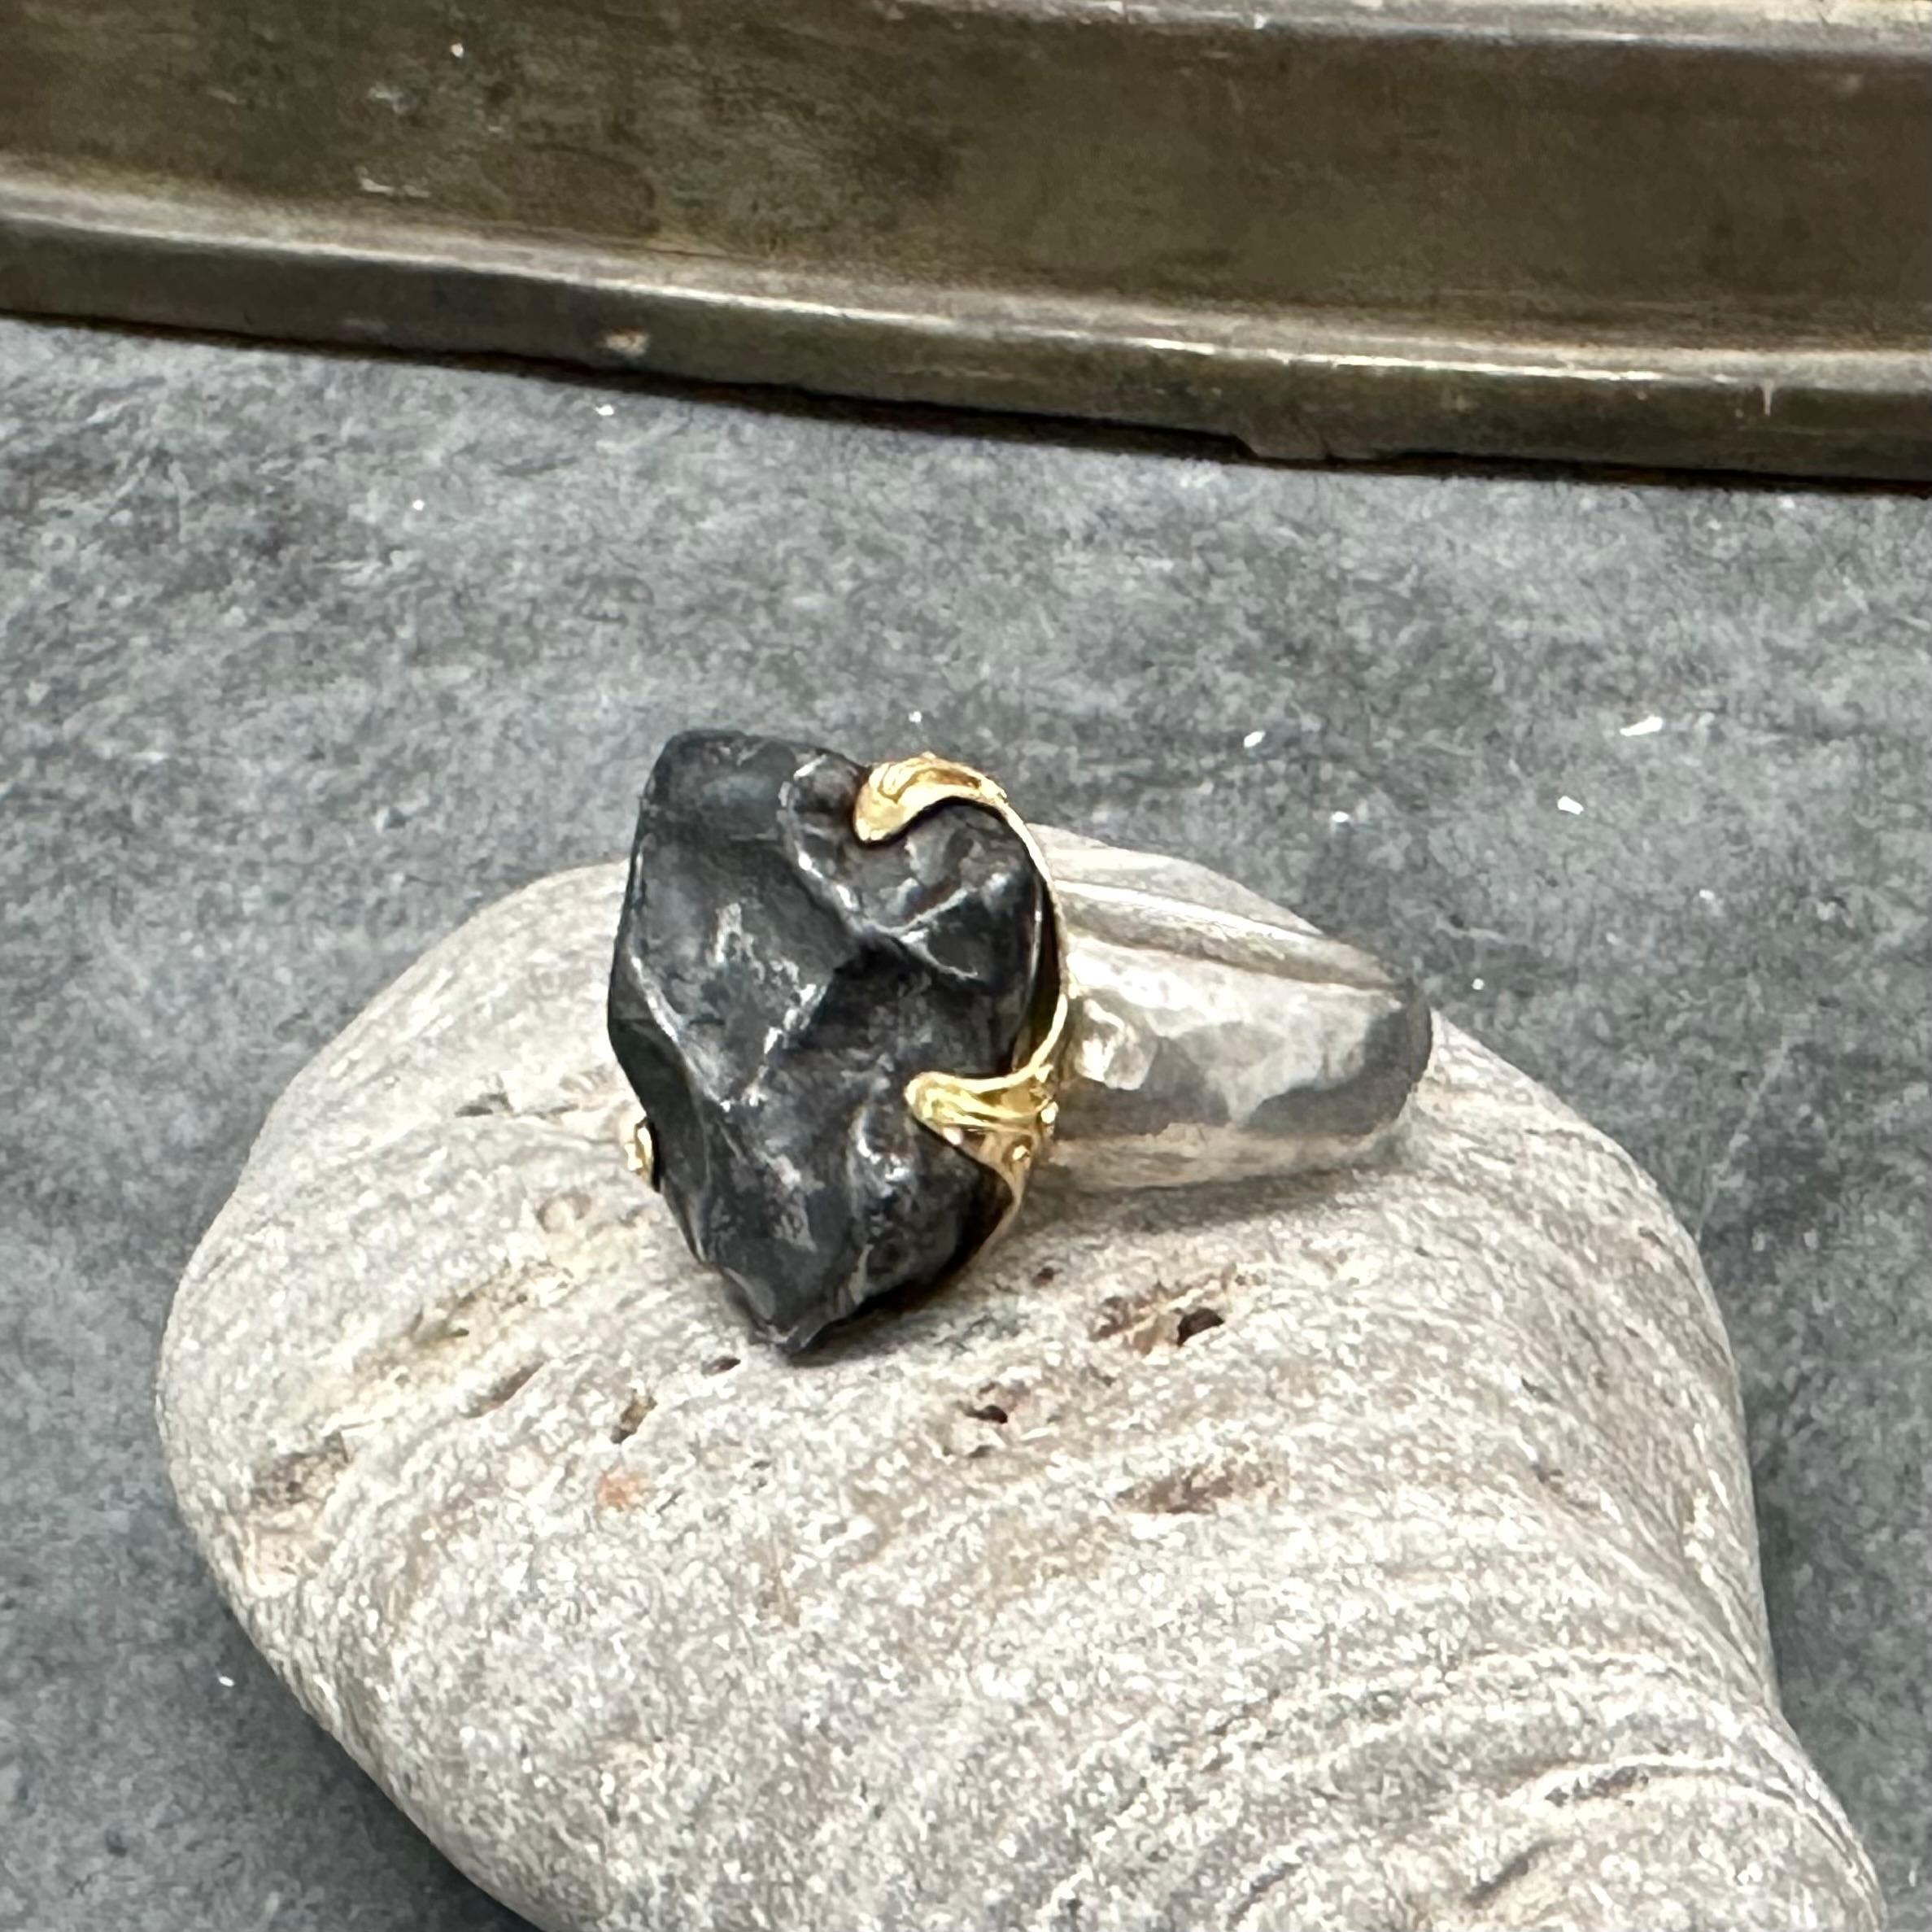 An individual irregular fragment (20 x 22 mm, 14.5 grams) of Sinkote-Alin meteorite with a fusion crust from its flaming entry through the atmosphere is set within a triangular 18K handmade prong setting with spiral accent wires above a heavy